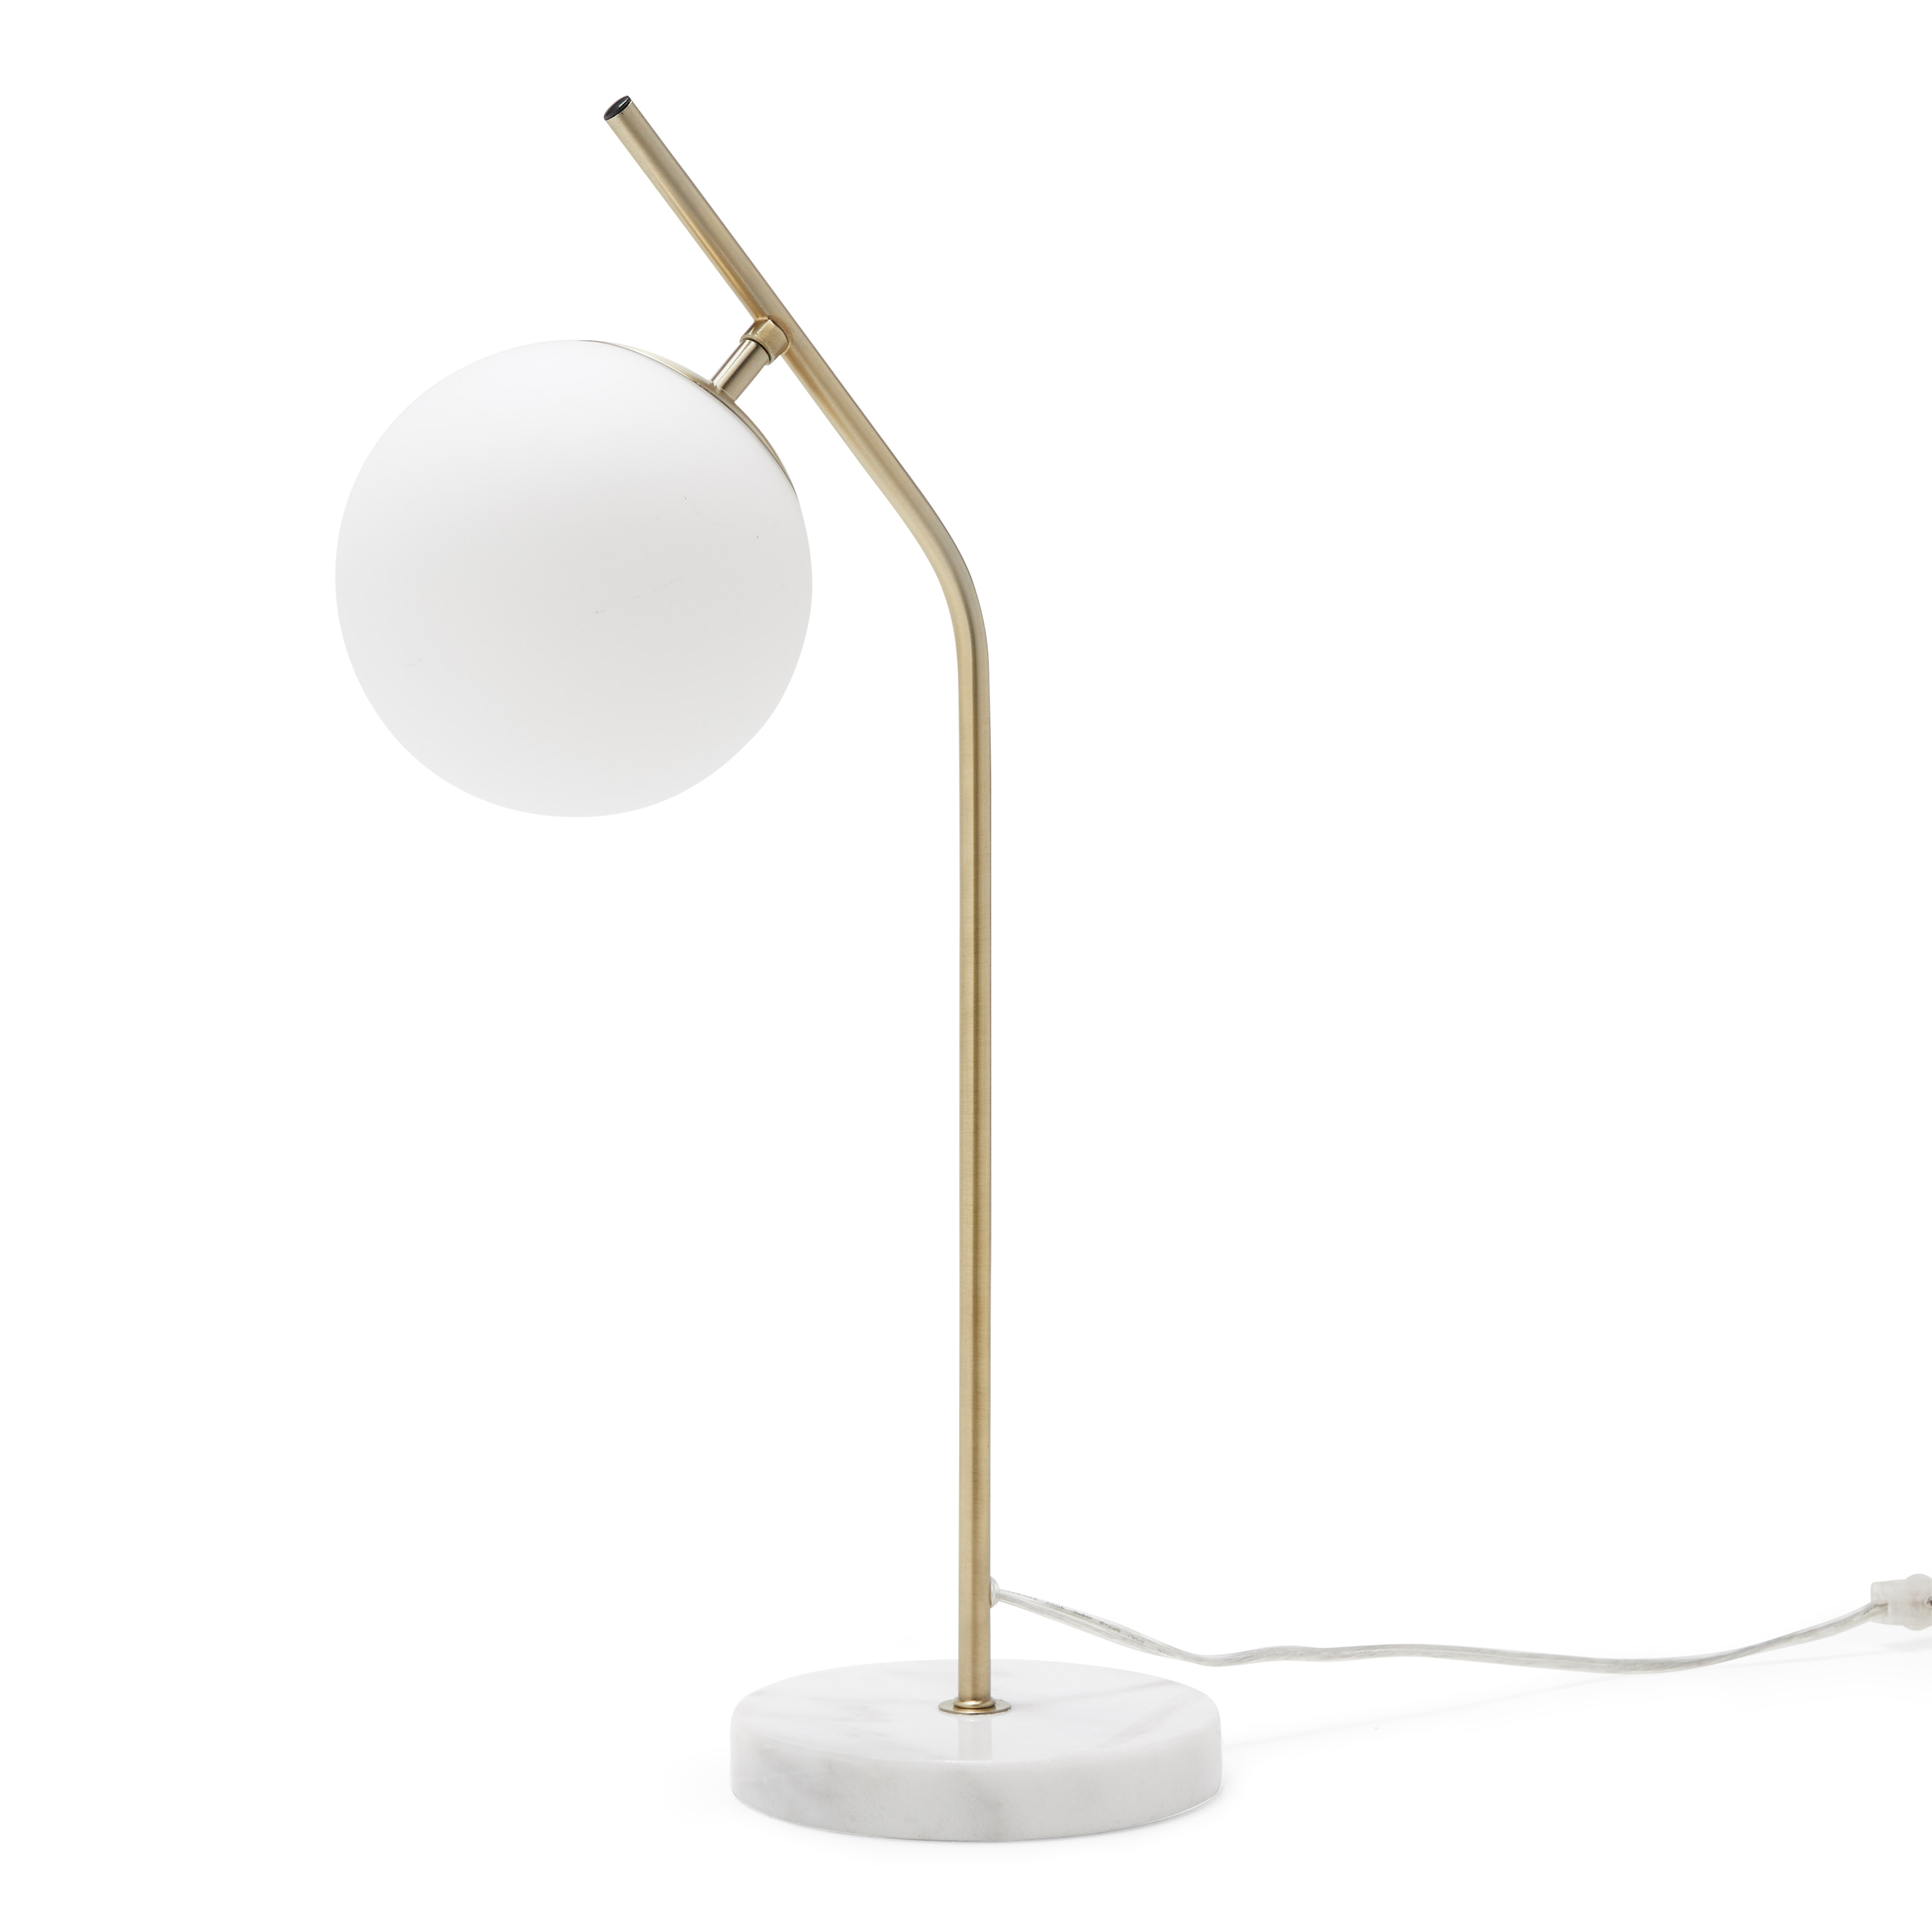 MoDRN Glam White and Antique Brass Marble Desk Lamp, LED Bulb Included - image 1 of 5